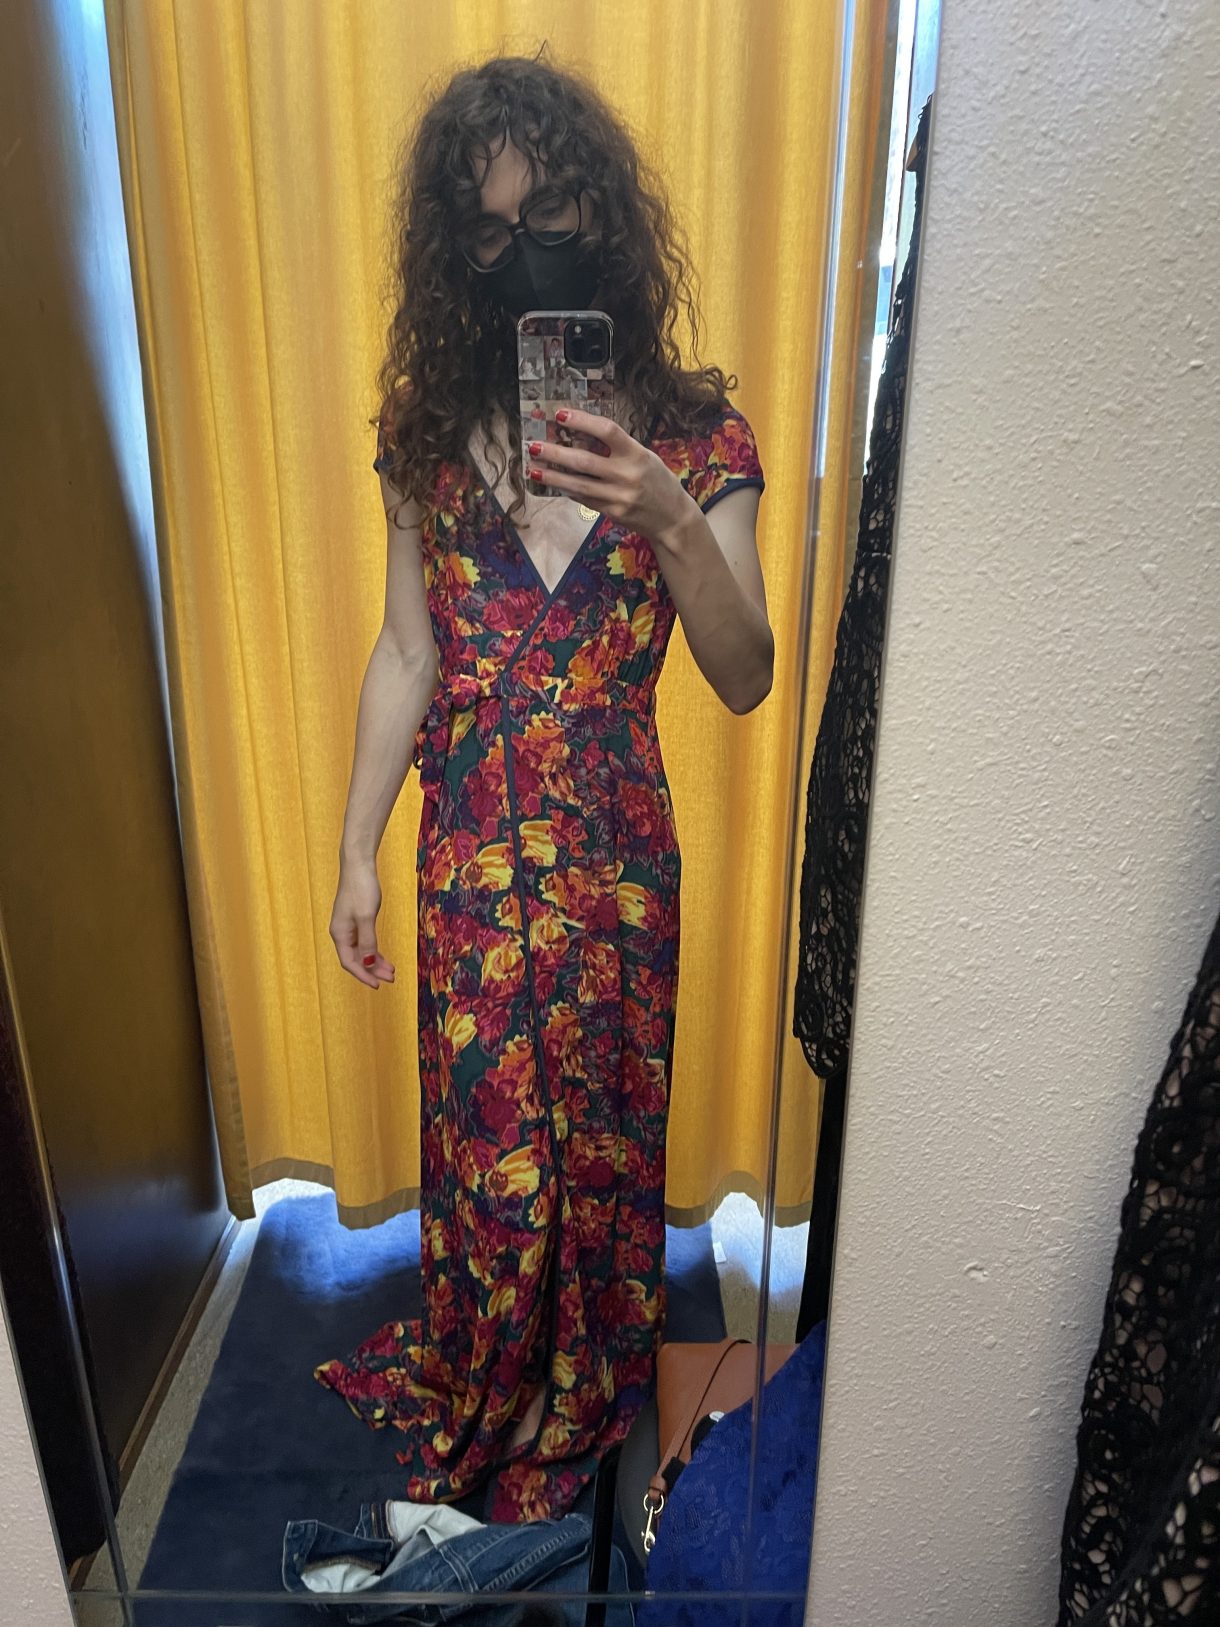 Drew is a white woman with long, curly brown hair. She is wearing a floor-length floral dress in vibrant colors and appears to be in a changing room.